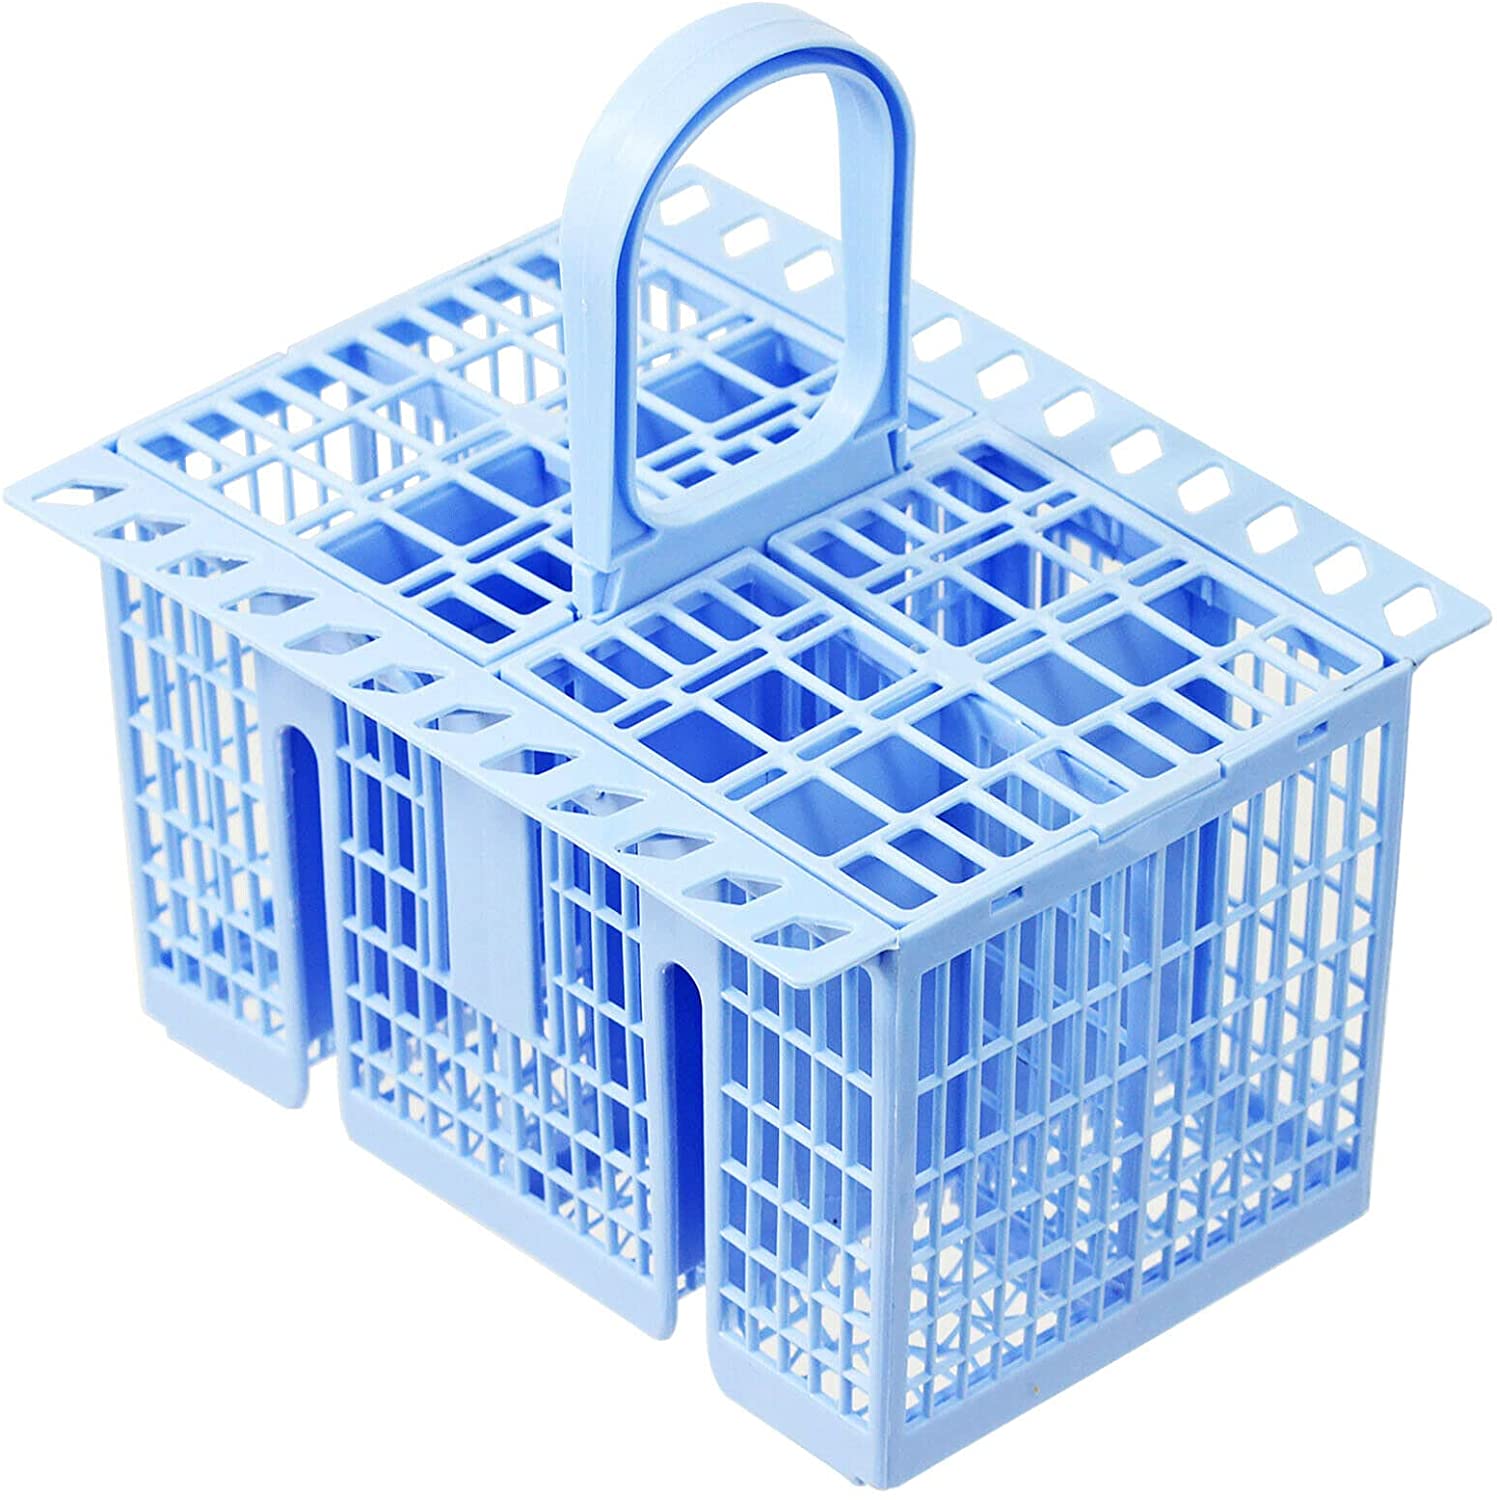 SPARES2GO Cutlery Basket compatible with Russell Hobbs Dishwasher (Blue, 220 x 208 x 160mm)